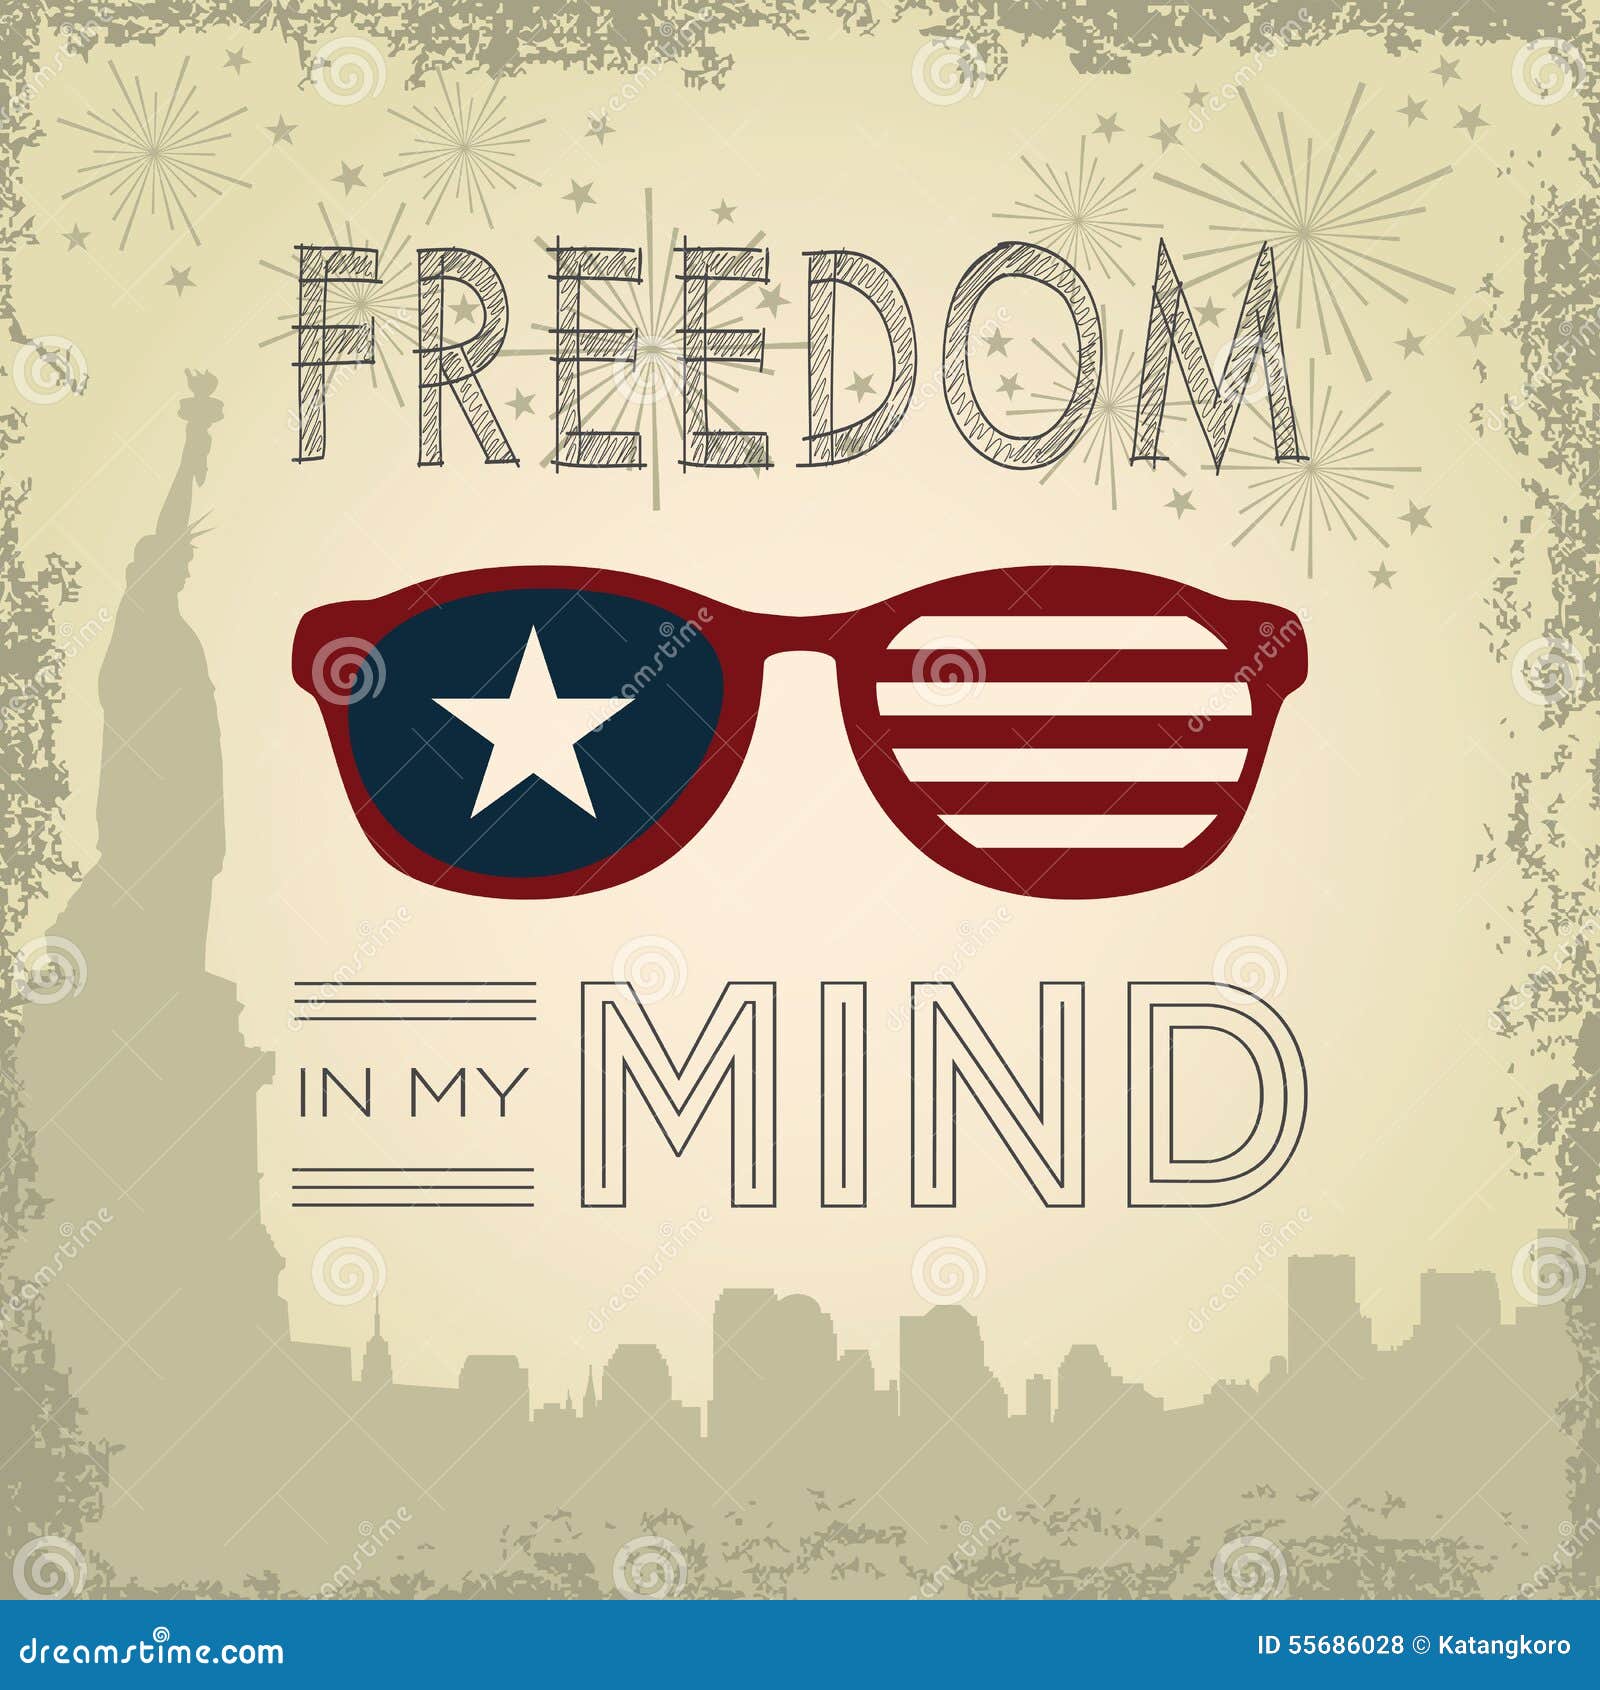 corporate avenger freedom is a state of mind rar